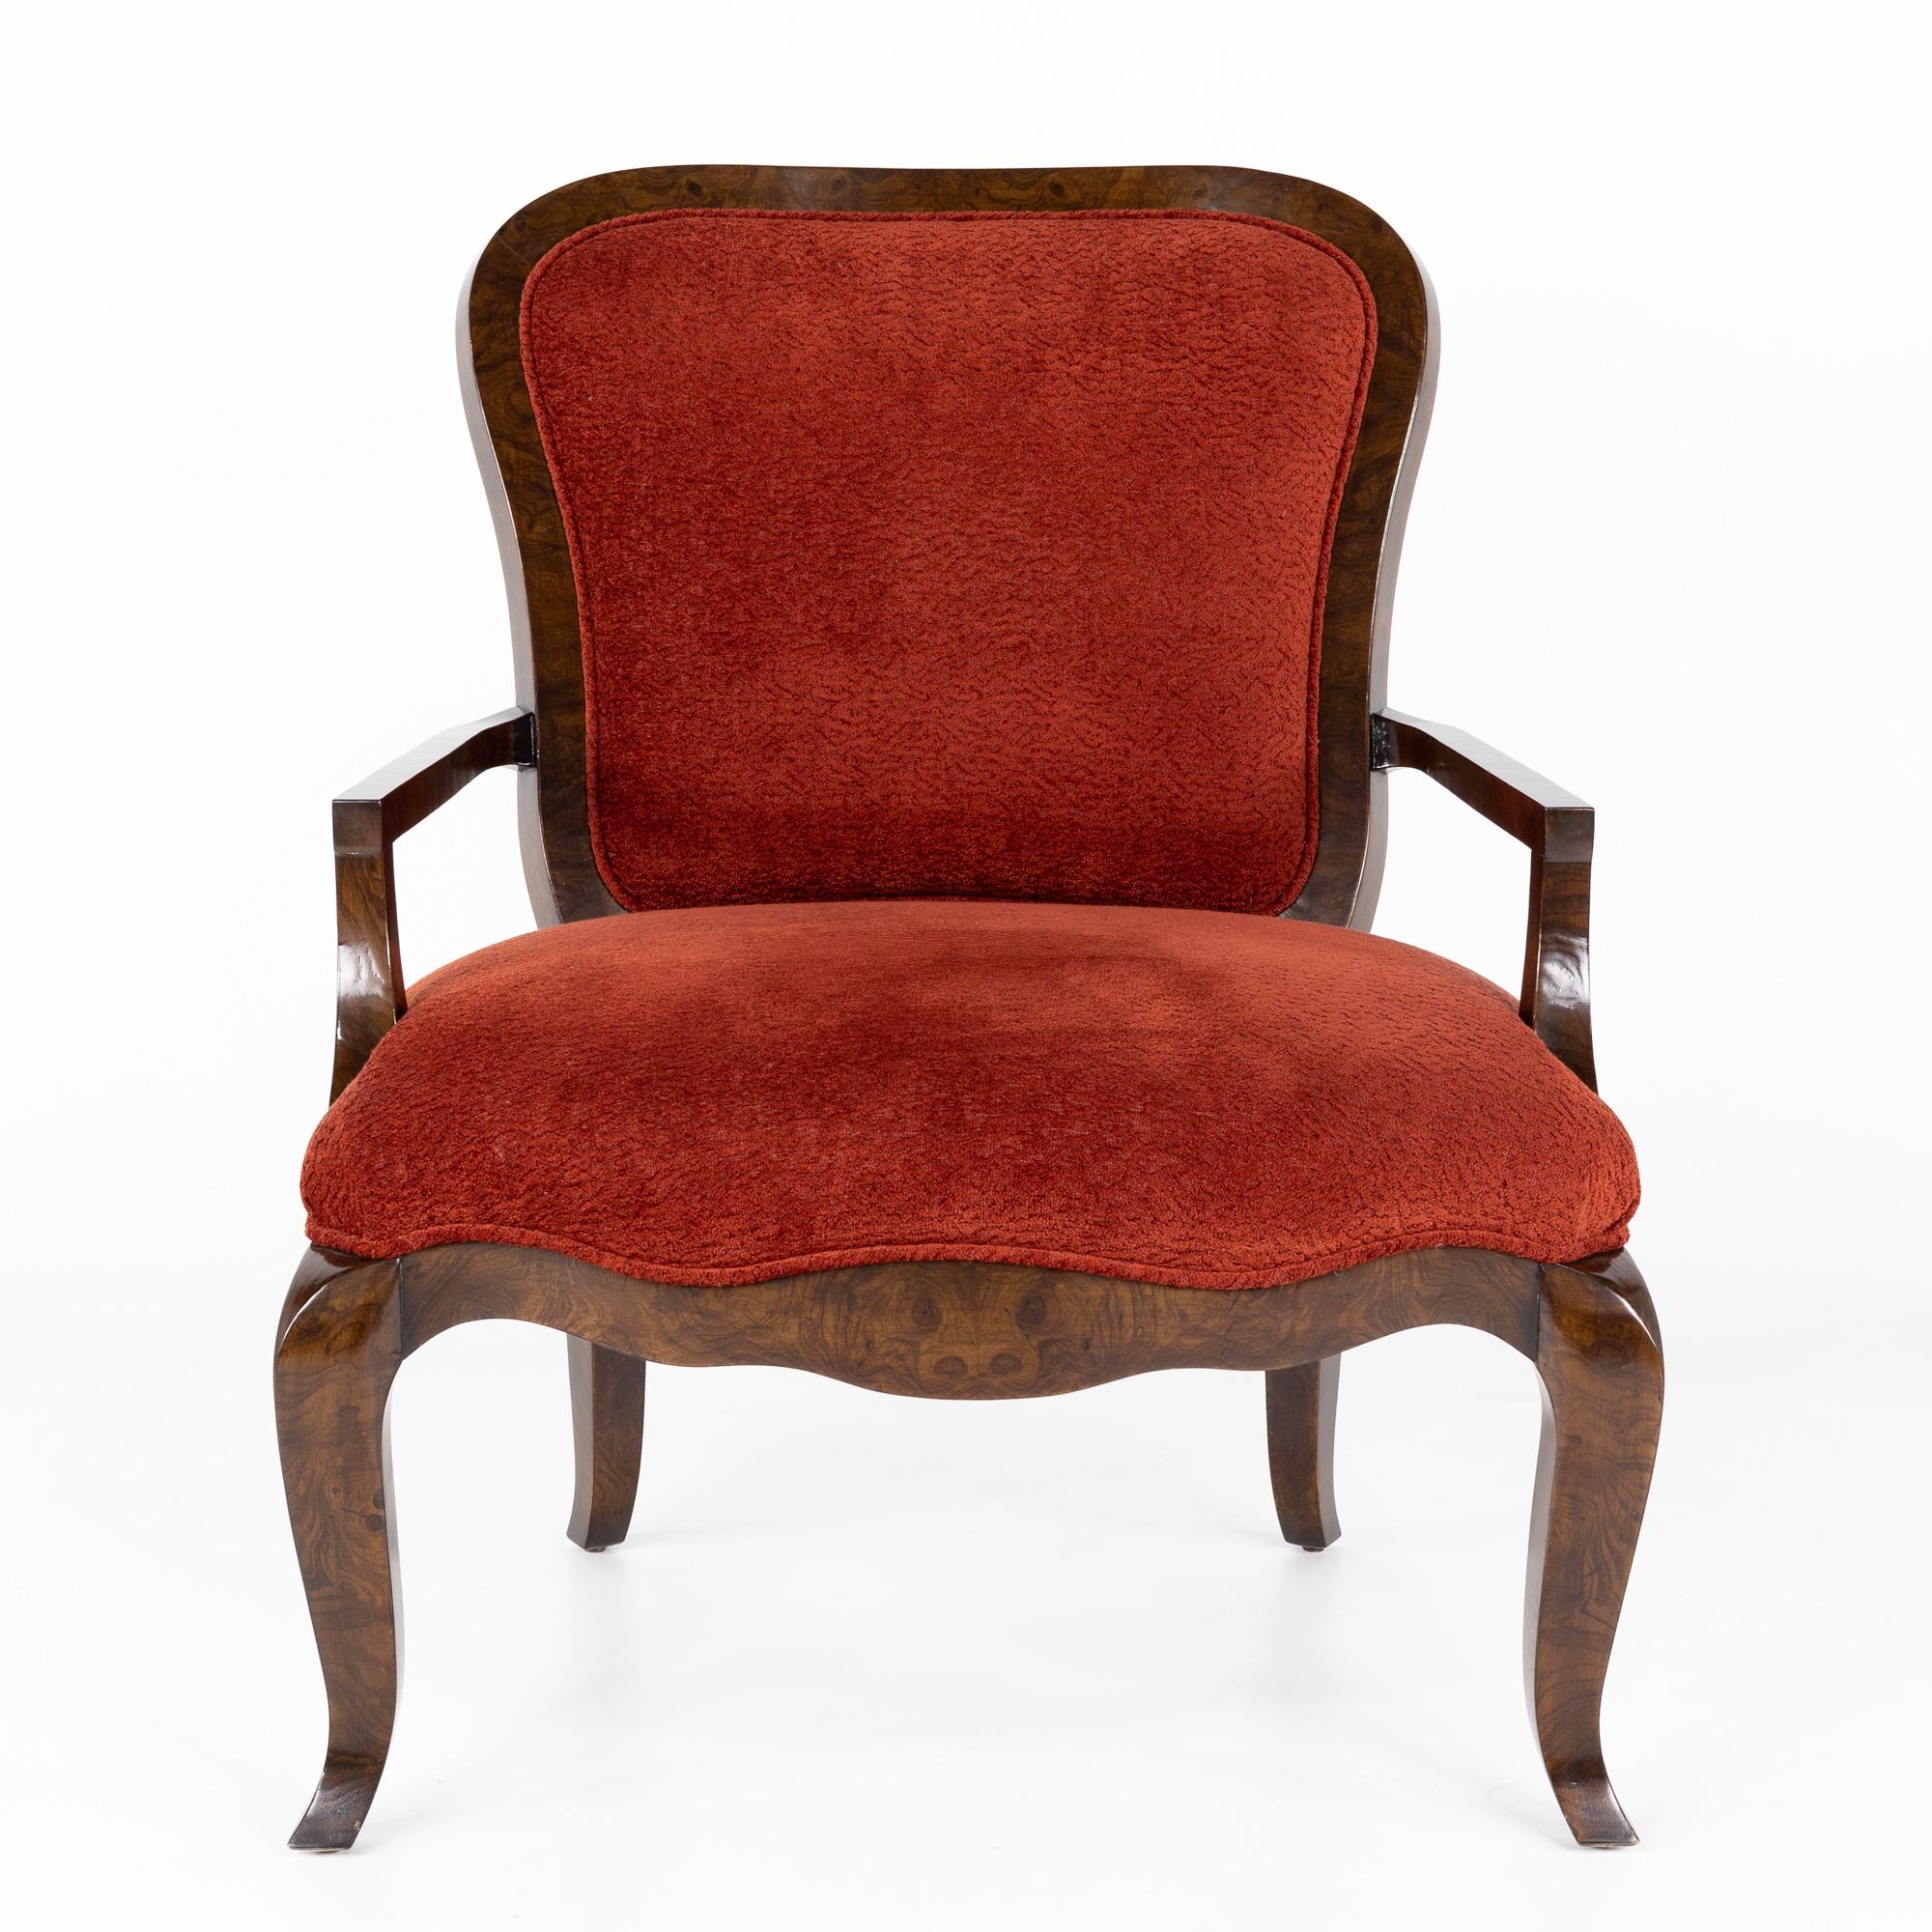 Lucien Rollin for William Switzer red upholstered and burlwood armchair

This chair measures: 32 wide x 34 deep x 41 inches high, with a seat height of 20.5 and arm height of 25 inches

This piece is in excellent vintage condtion with a small